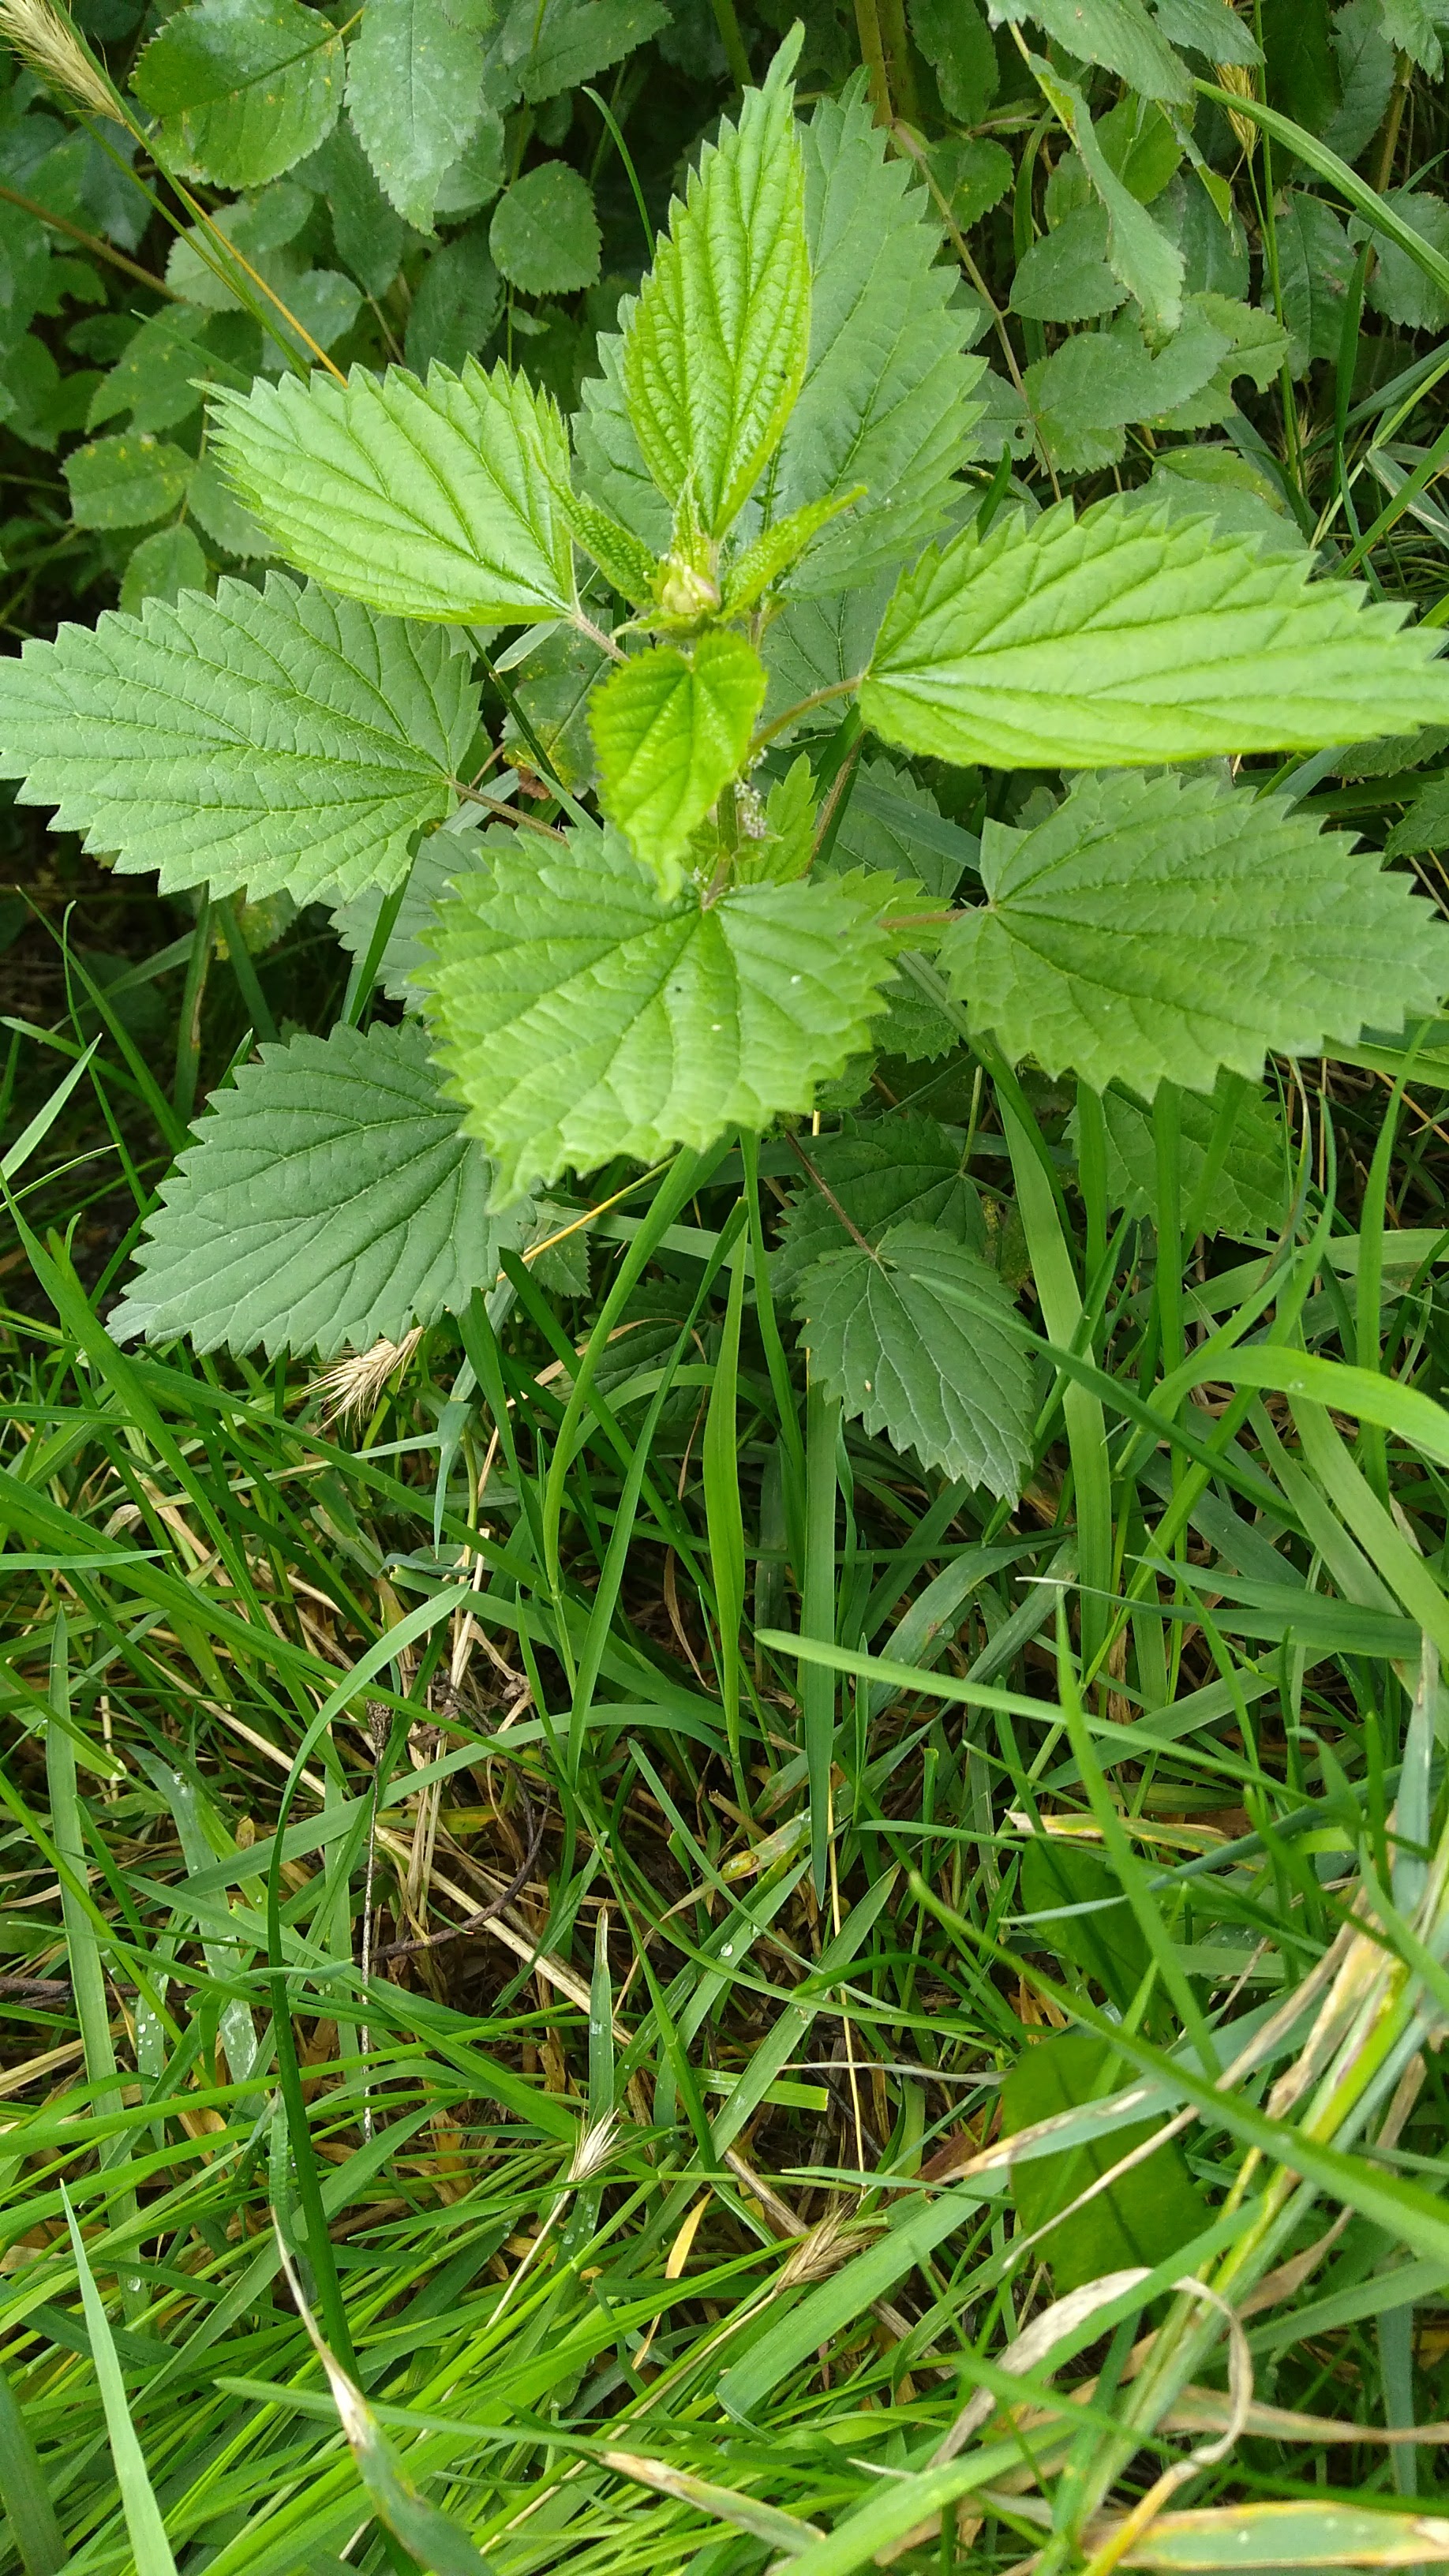 Home Remedies for Nettle Stings